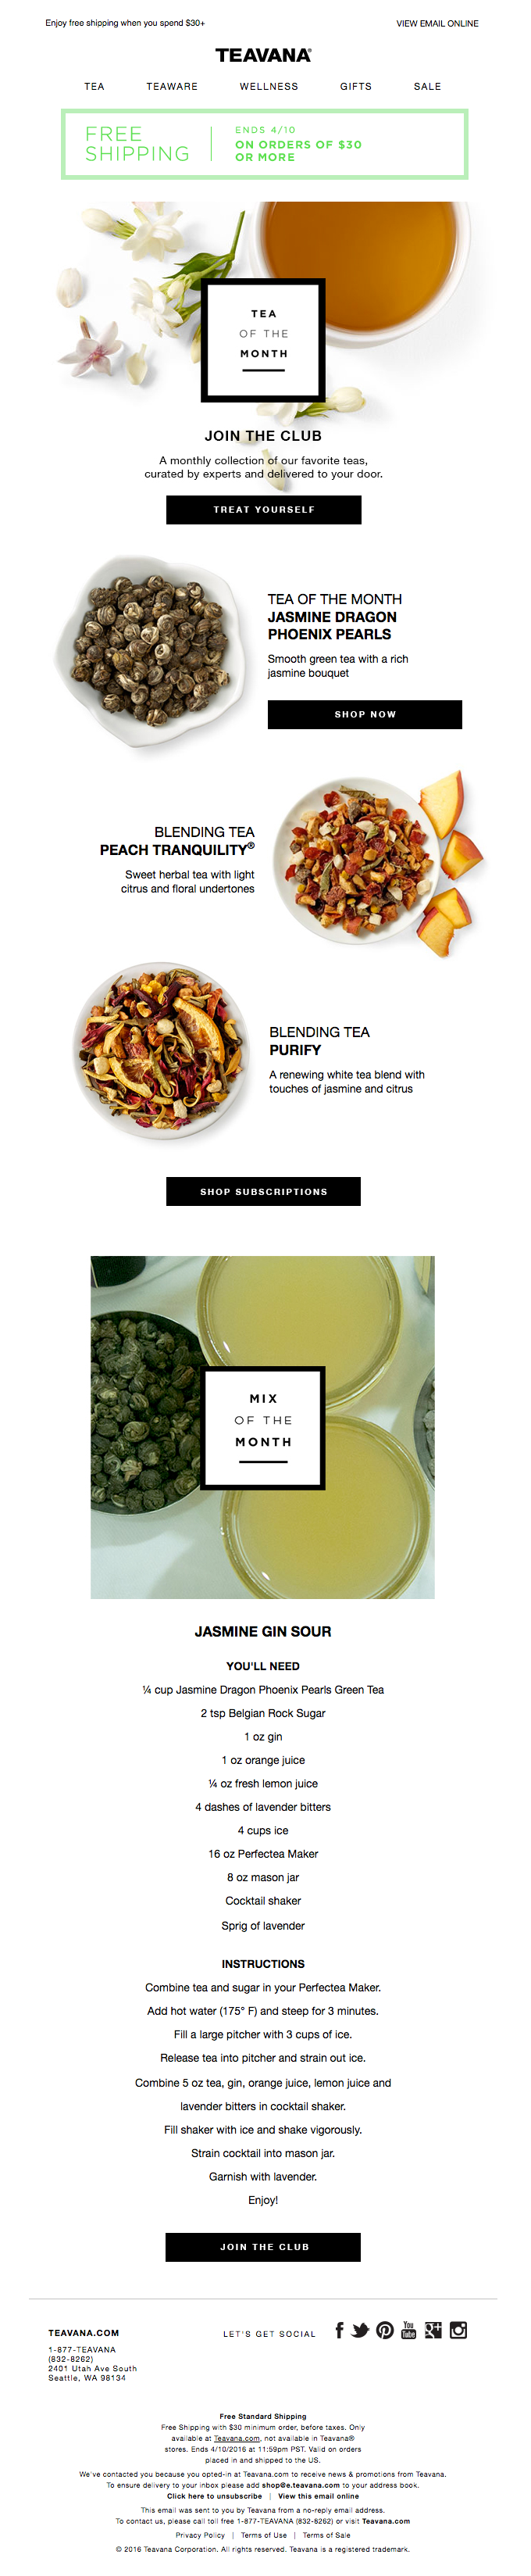 Tea of the Month + Free Shipping